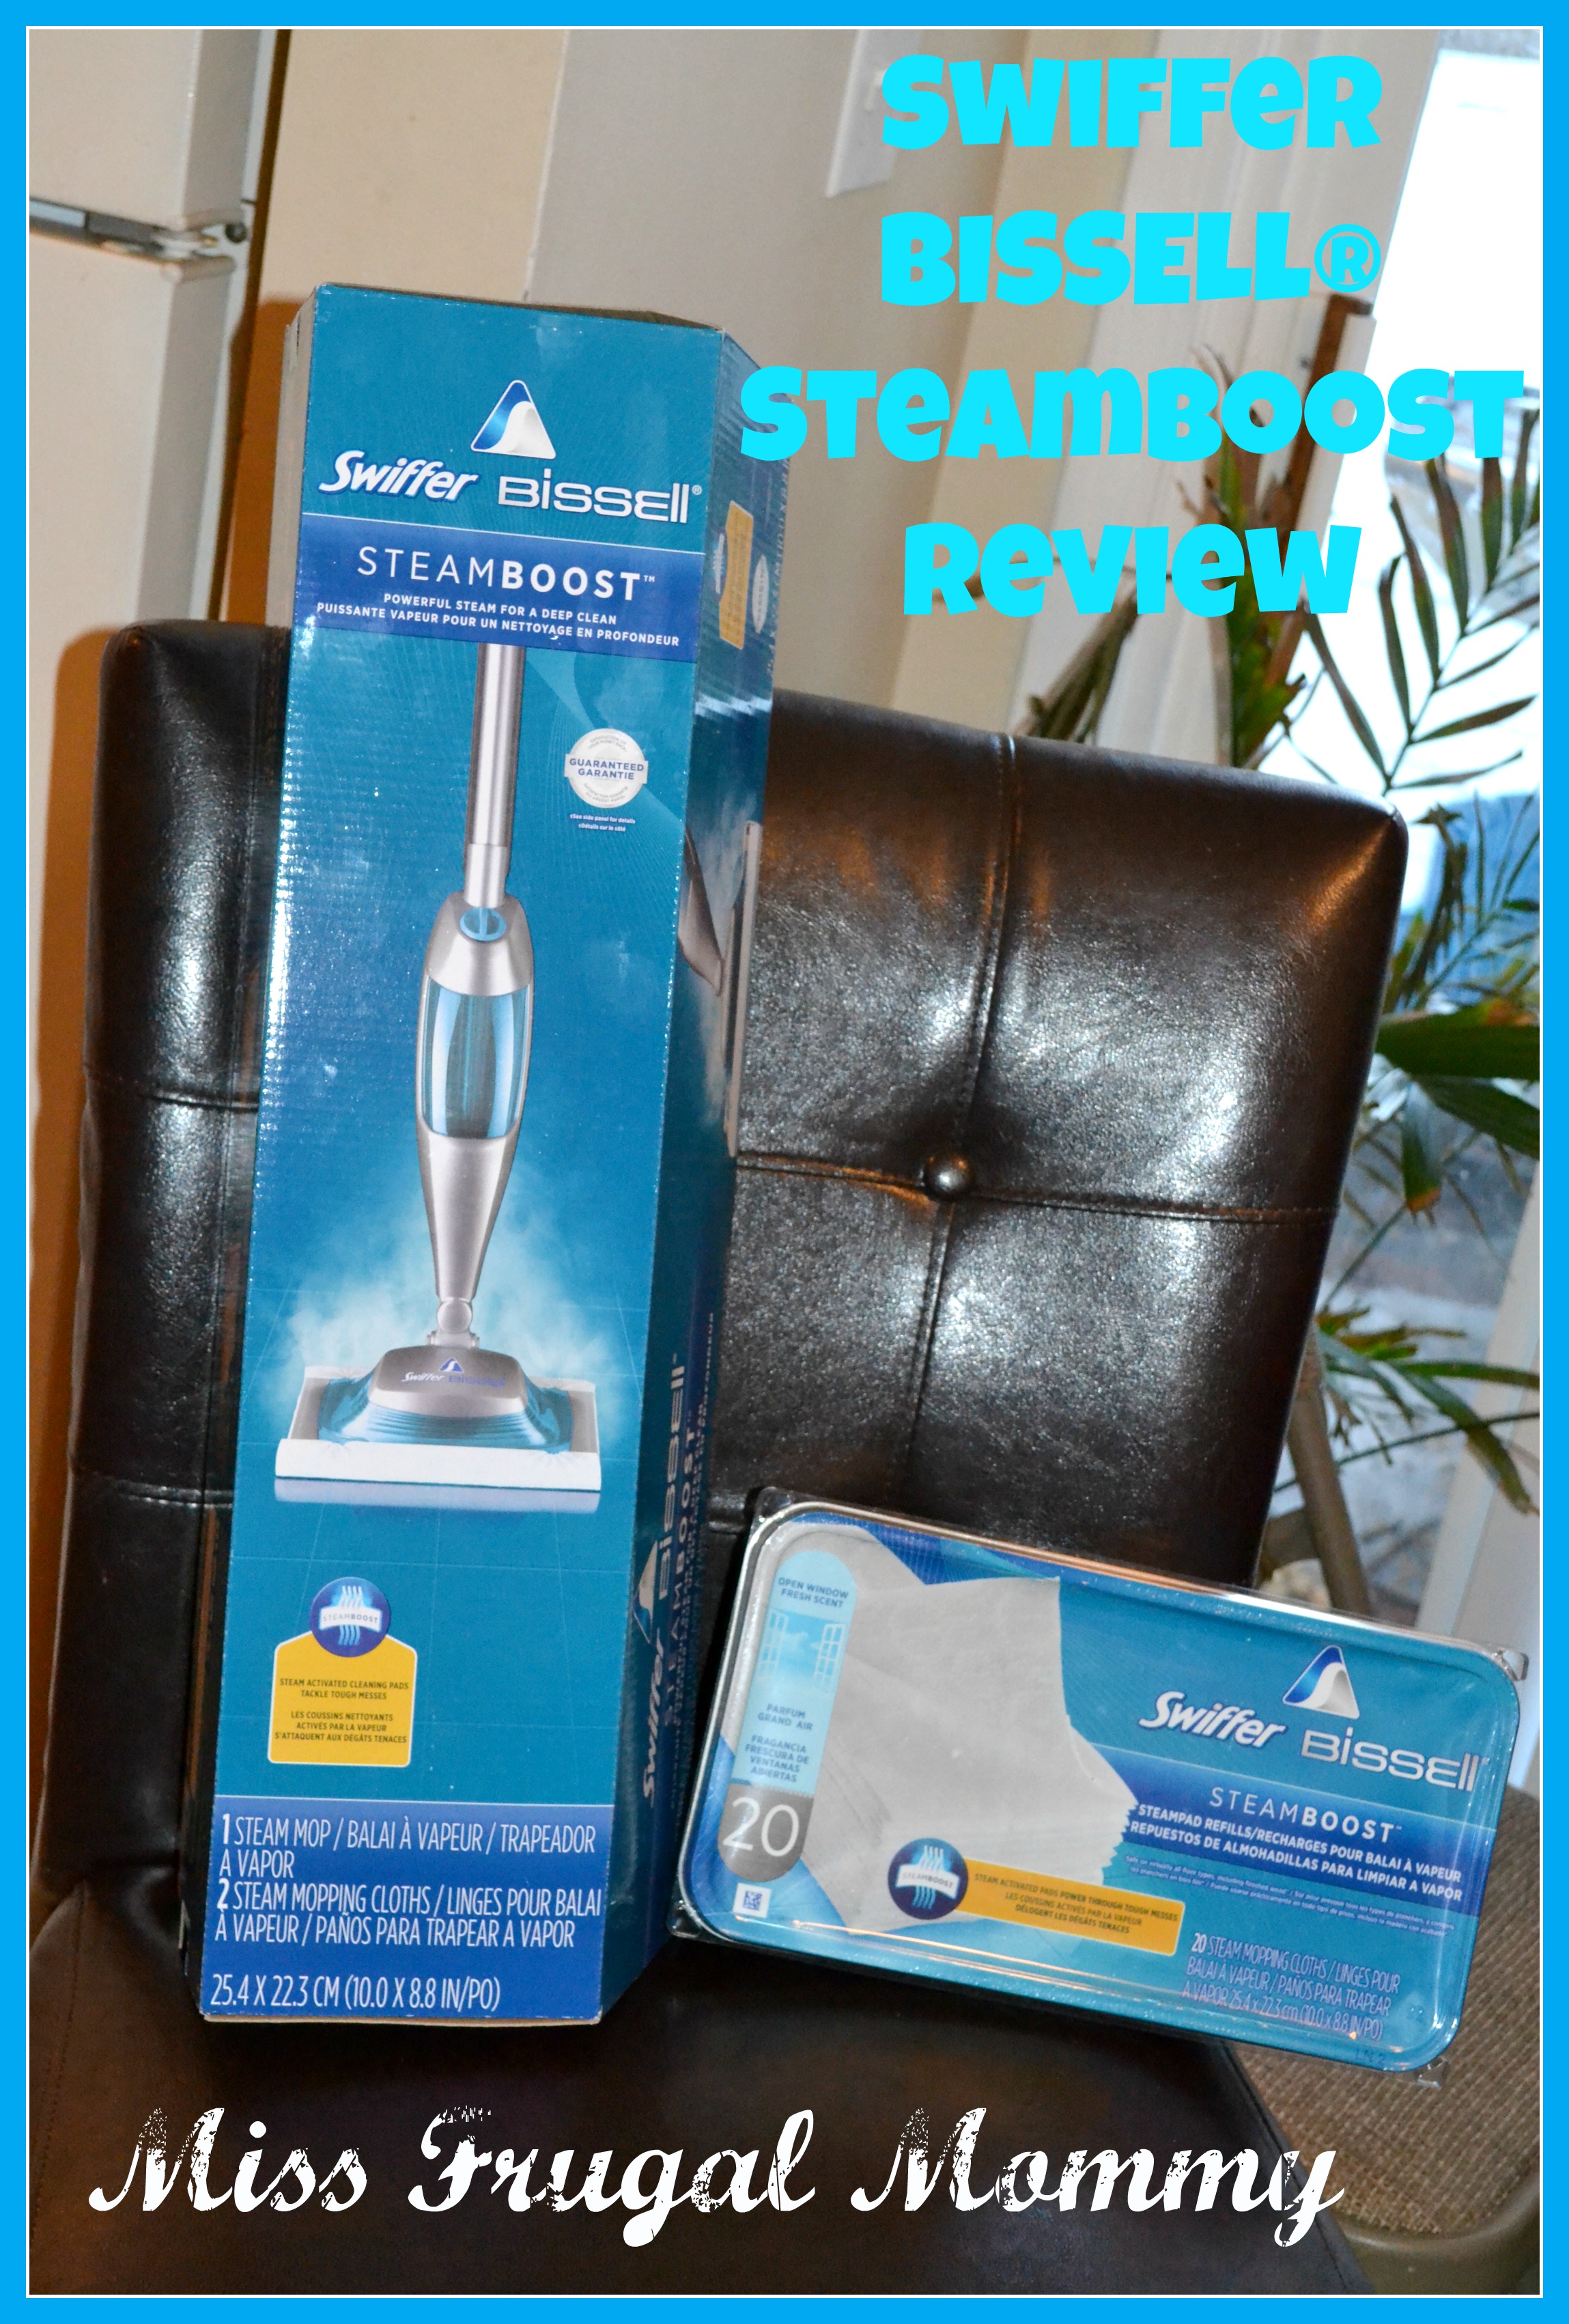 Swiffer BISSELL® SteamBoost Review